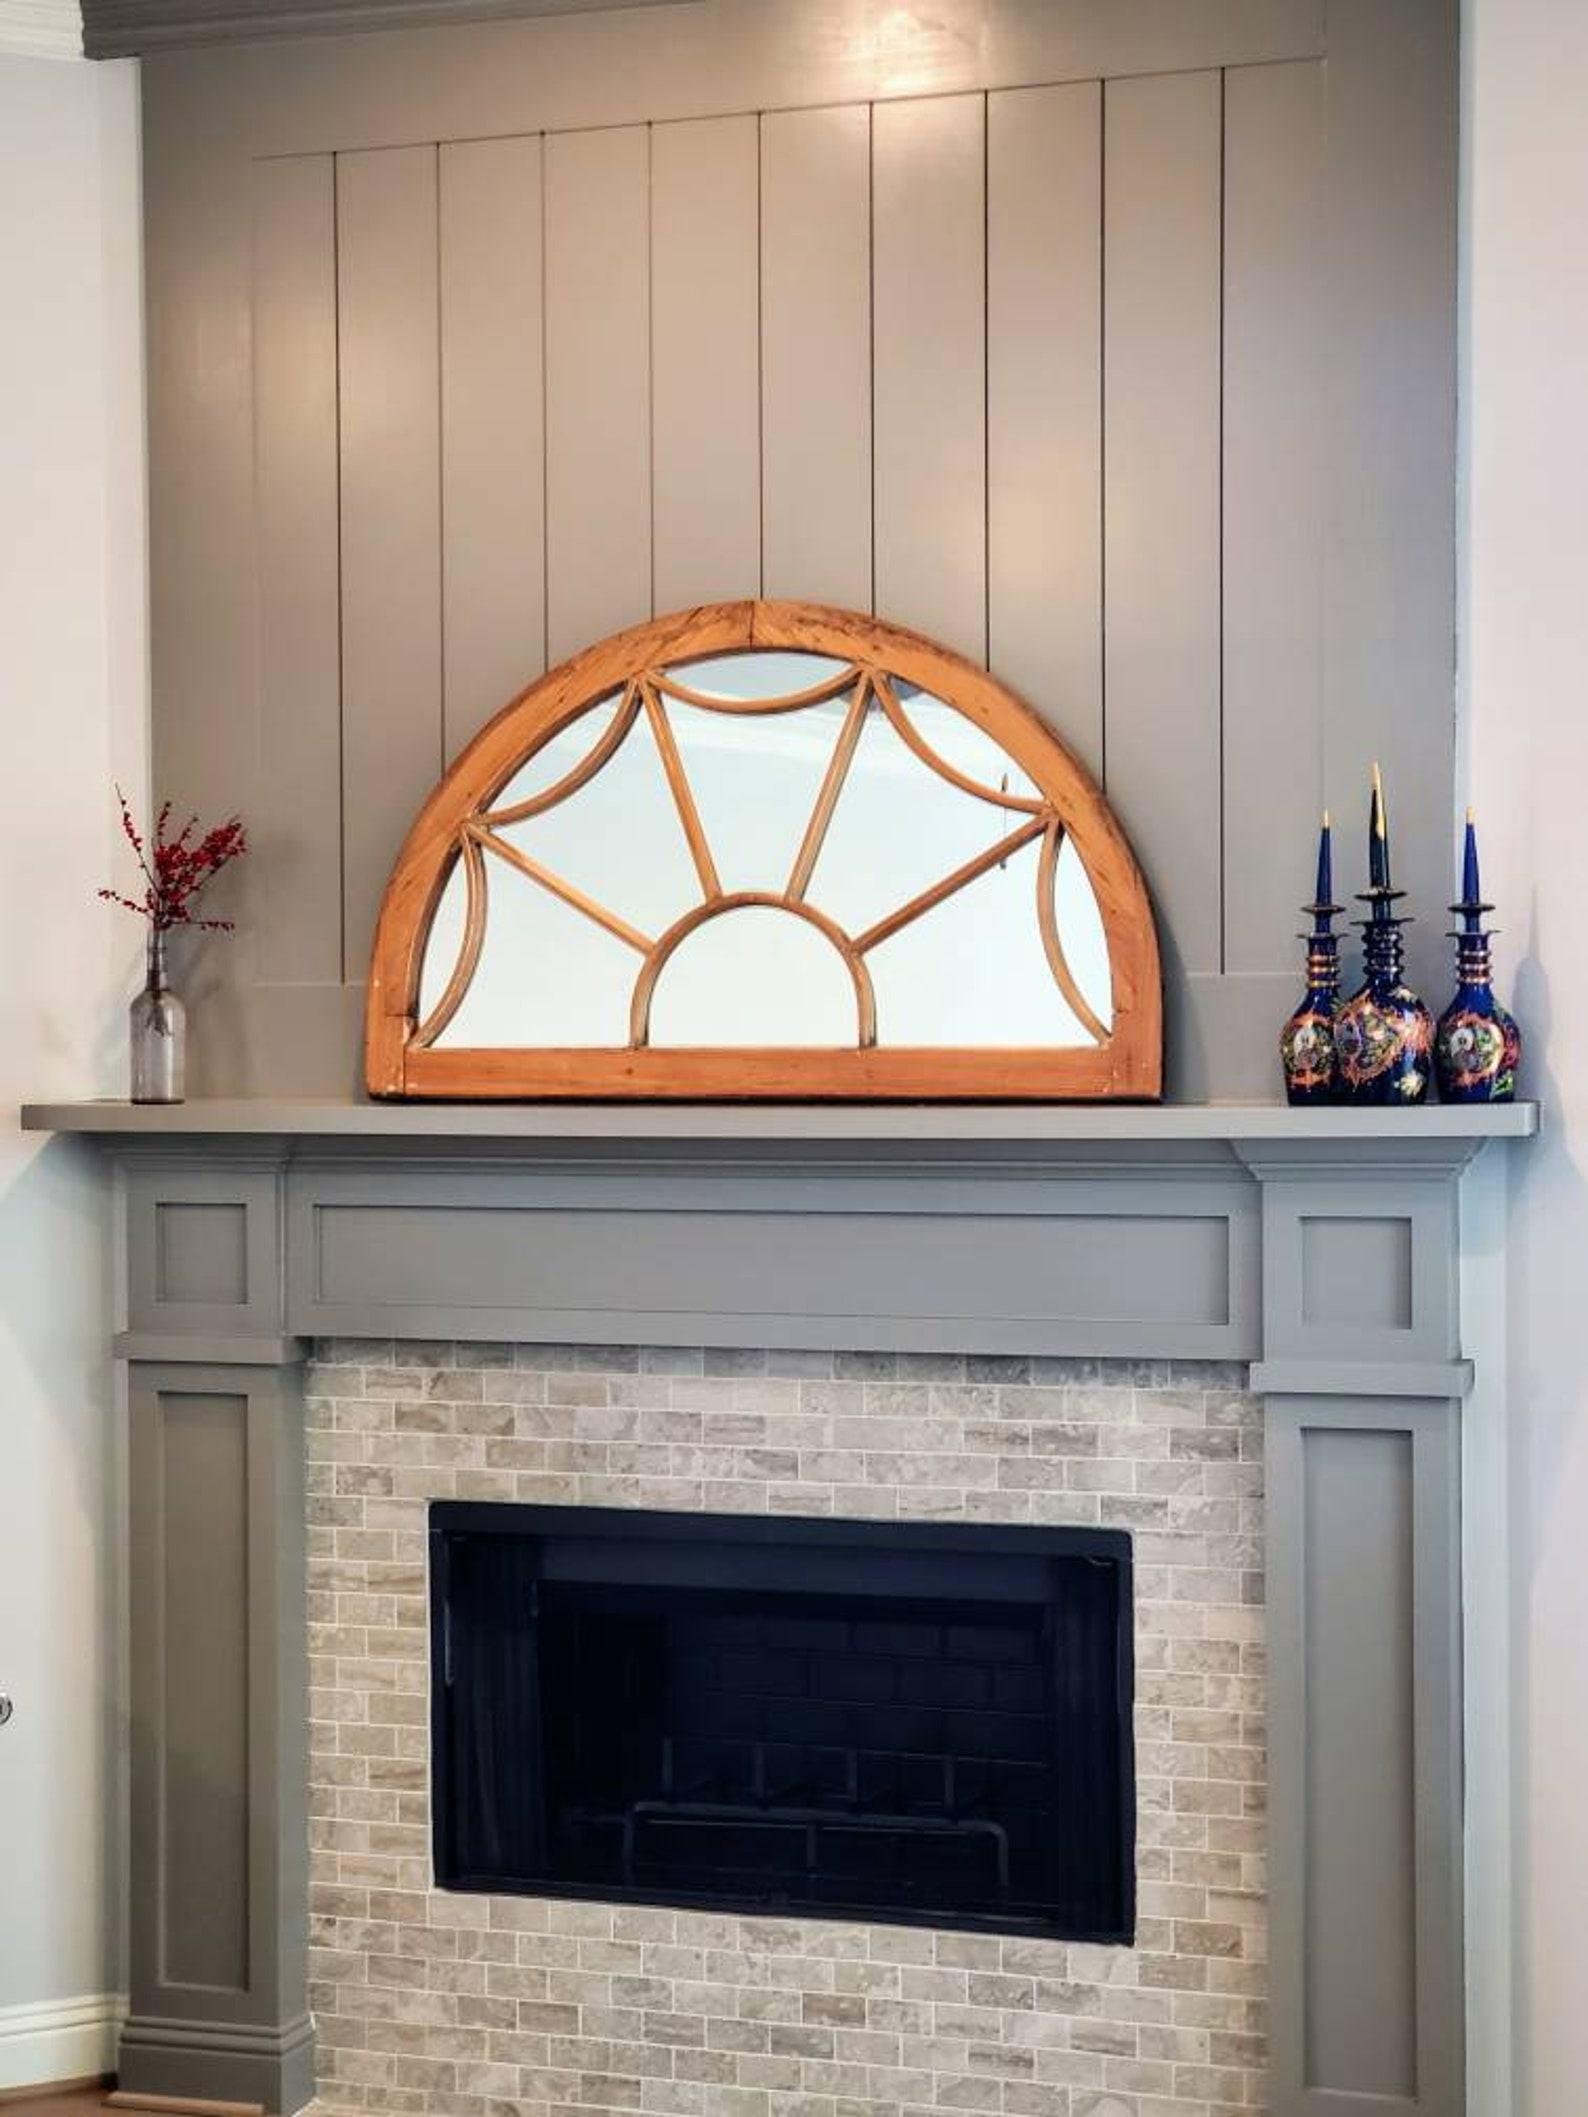 An antique architectural transom demilune window repurposed and fashioned as a mirror. The large early 20th century decorative fanlight building element in semi-circular form, with wooden arch, mirrored back and spider web like wooden slat tracery